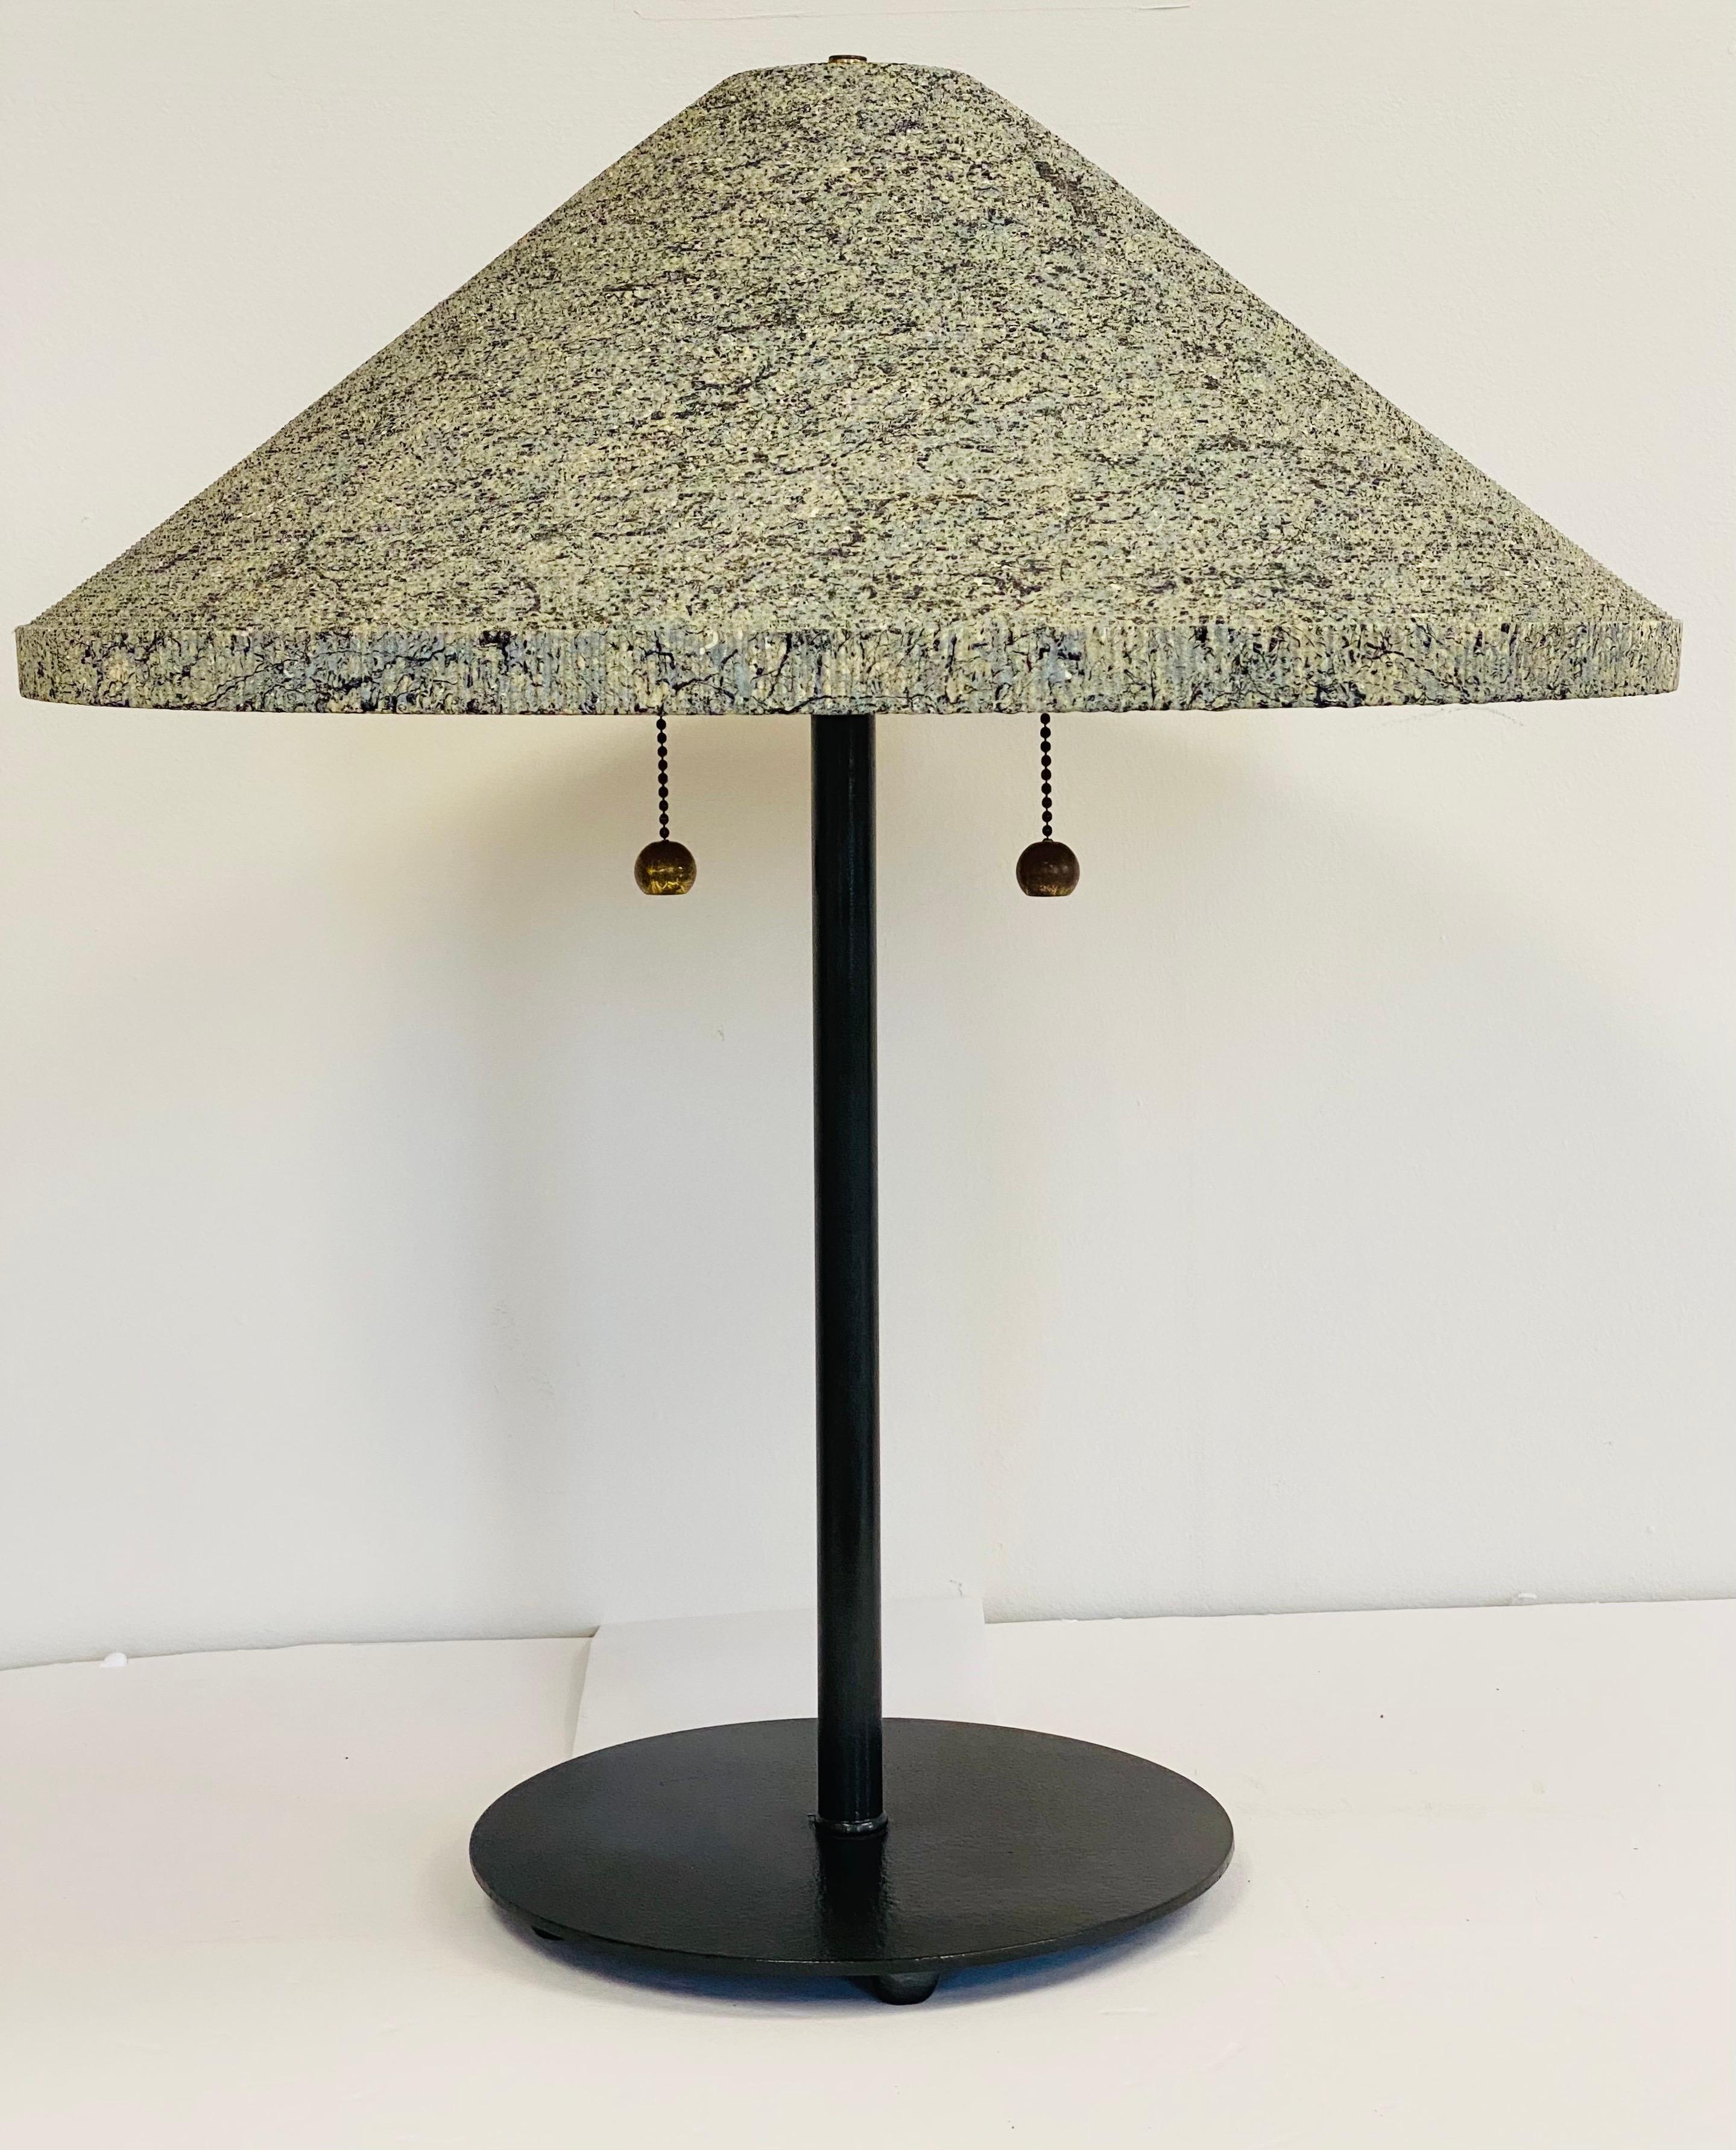 We are very pleased to offer a whimsical table lamp designed by Gregory Van Pelt, circa the 1970s. Defined by its distinctive mix of materials, this table lamp will make a modern statement. Its sleek body is crafted from metal and the cone shade is